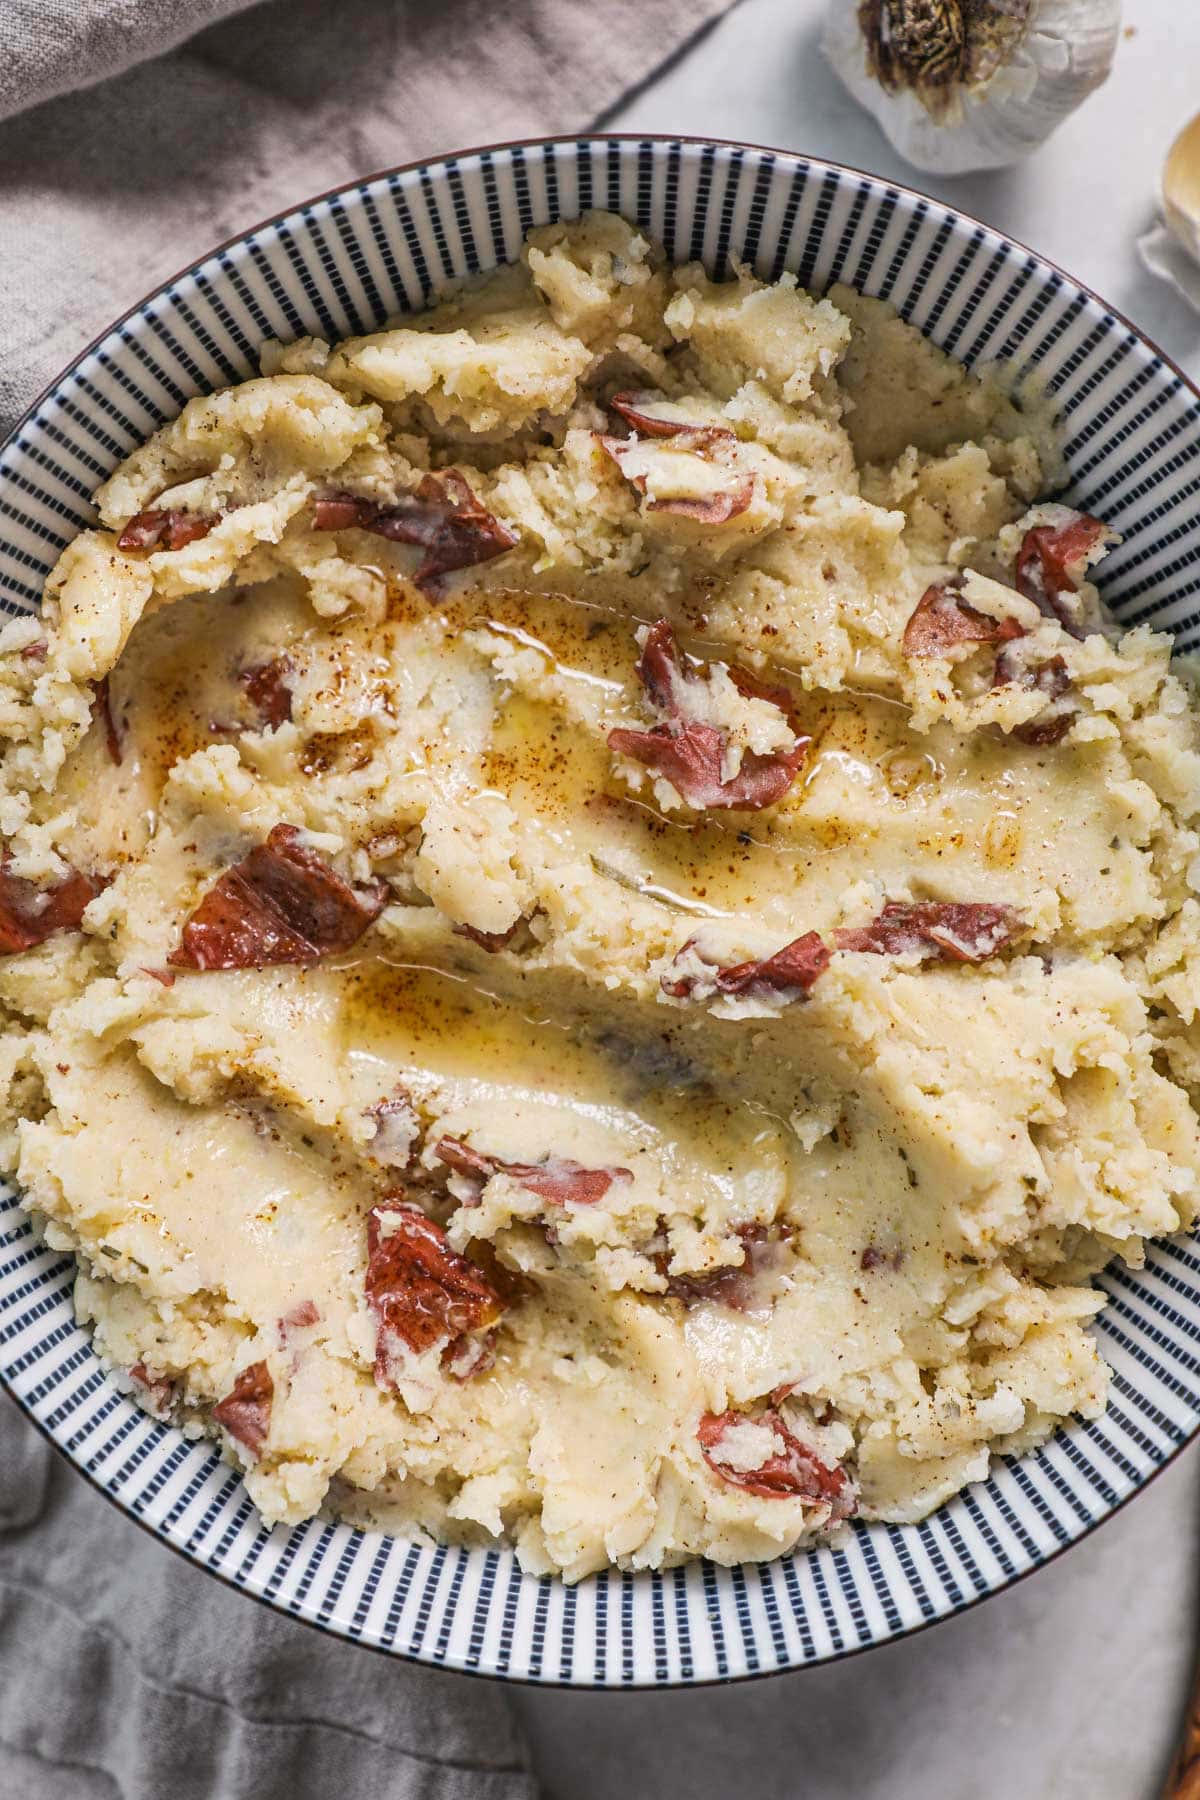 Mashed potatoes with red skin topped with a drizzle of browned butter.